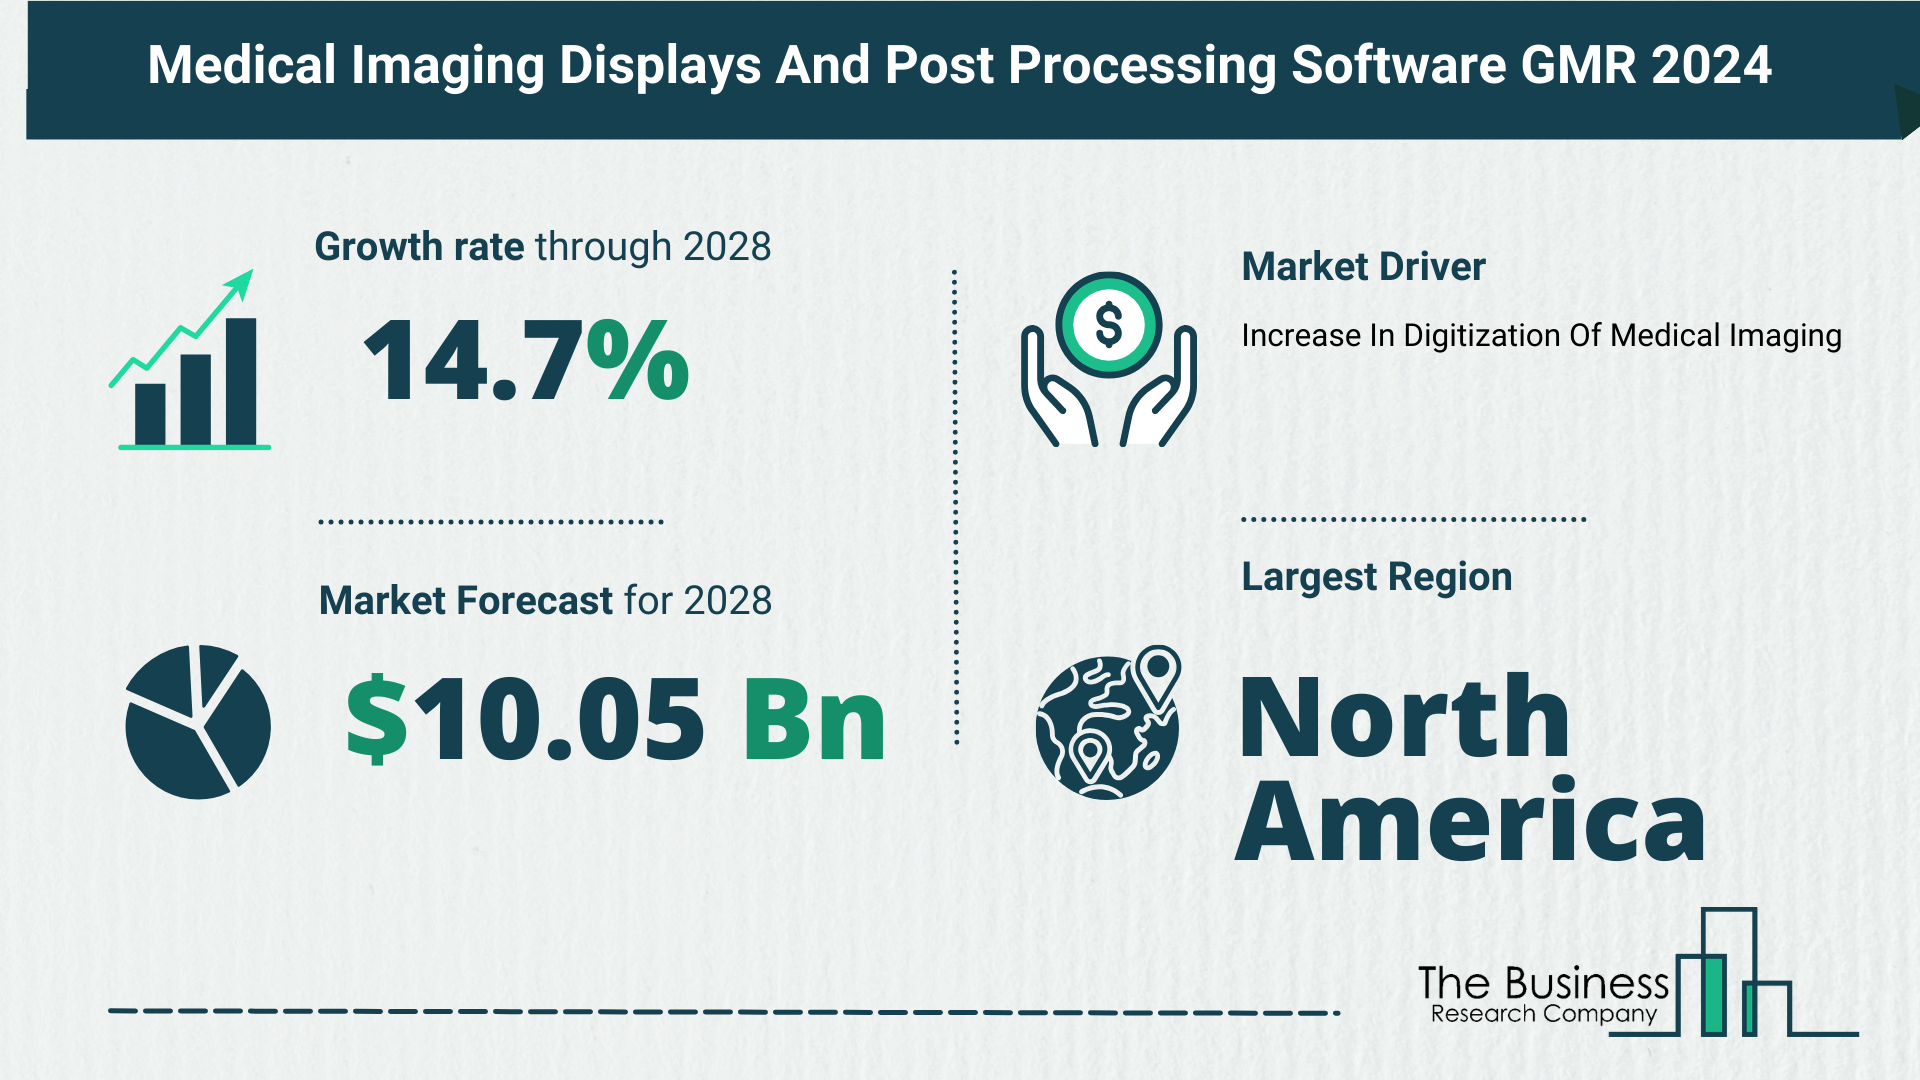 How Is The Medical Imaging Displays And Post Processing Software Market Expected To Grow Through 2024-2033